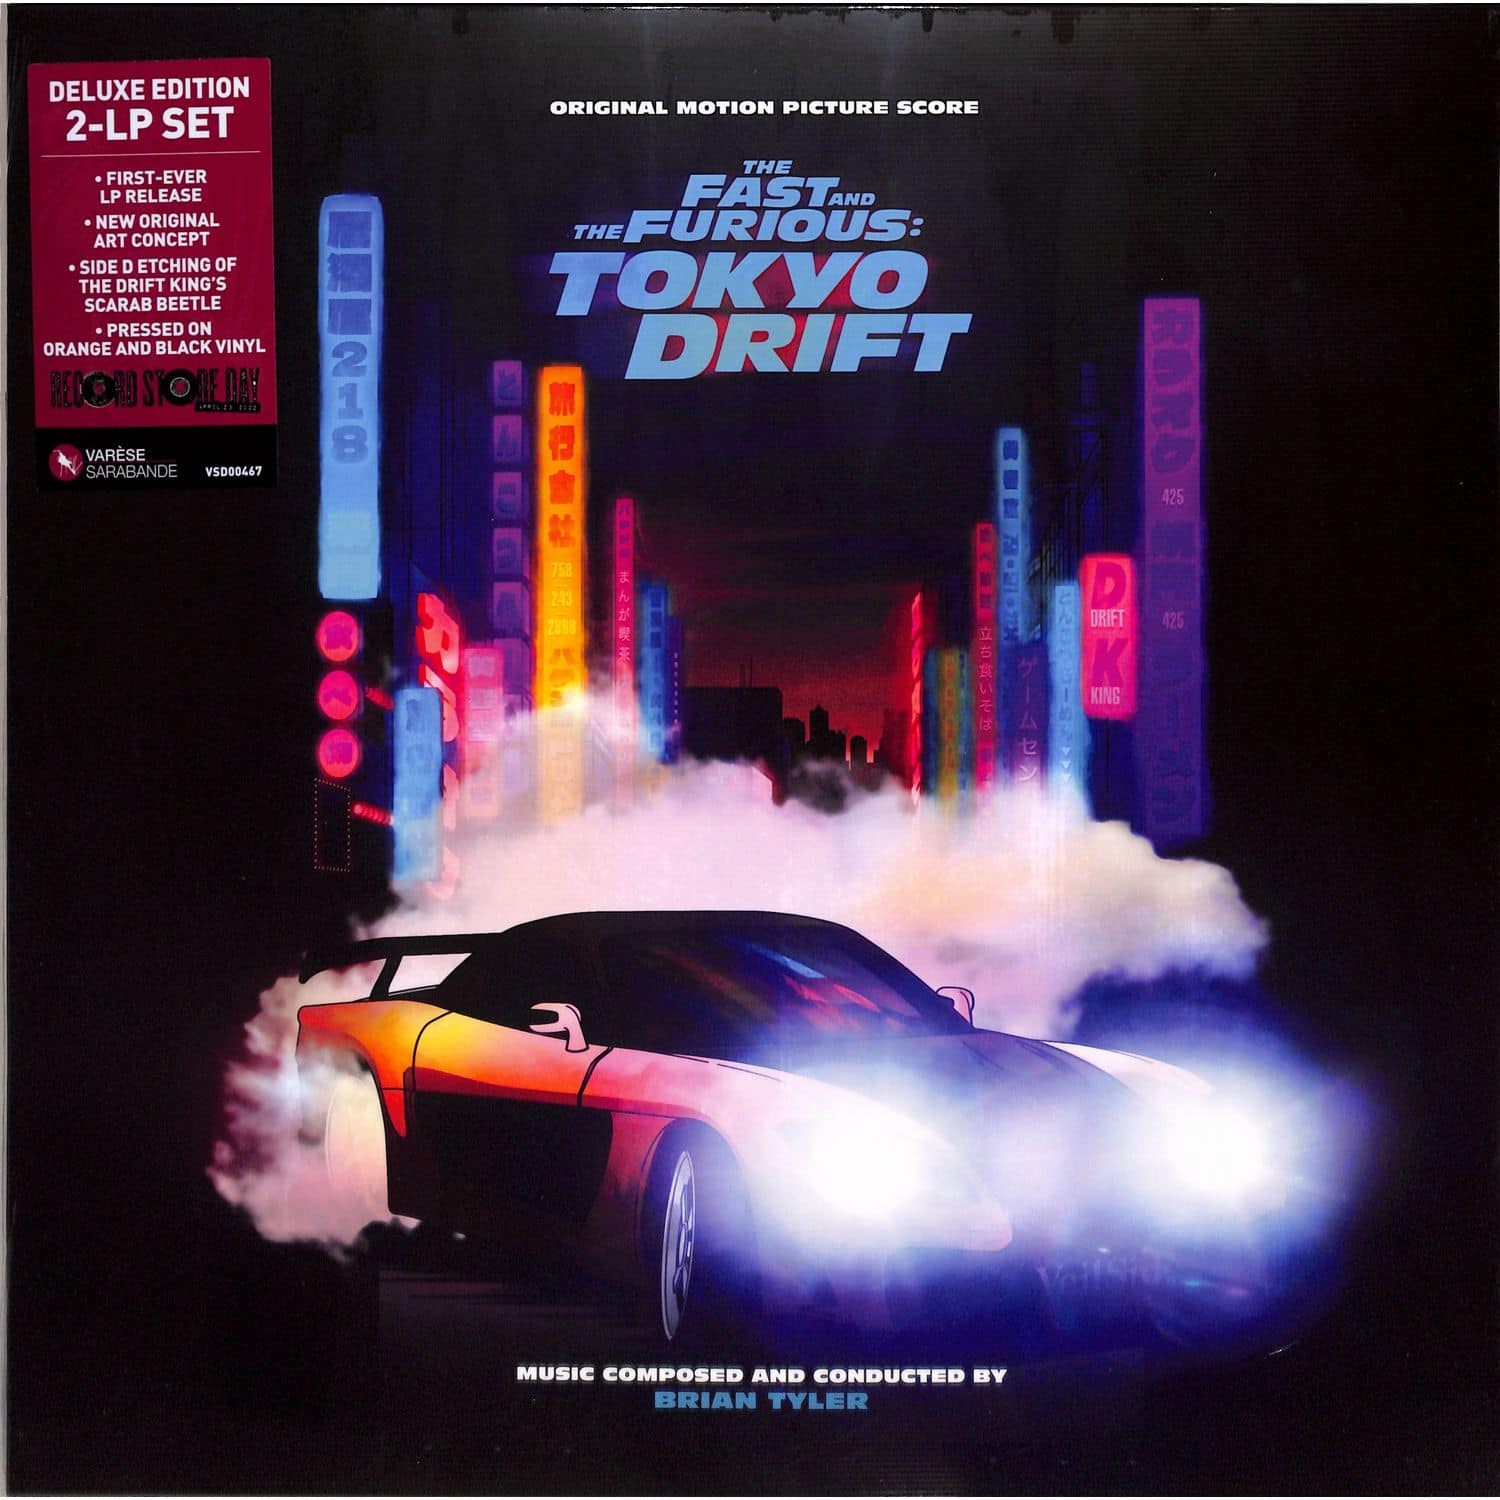 Ost/Brian Tyler - THE FAST AND THE FURIOUS: TOKYO DRIFT 